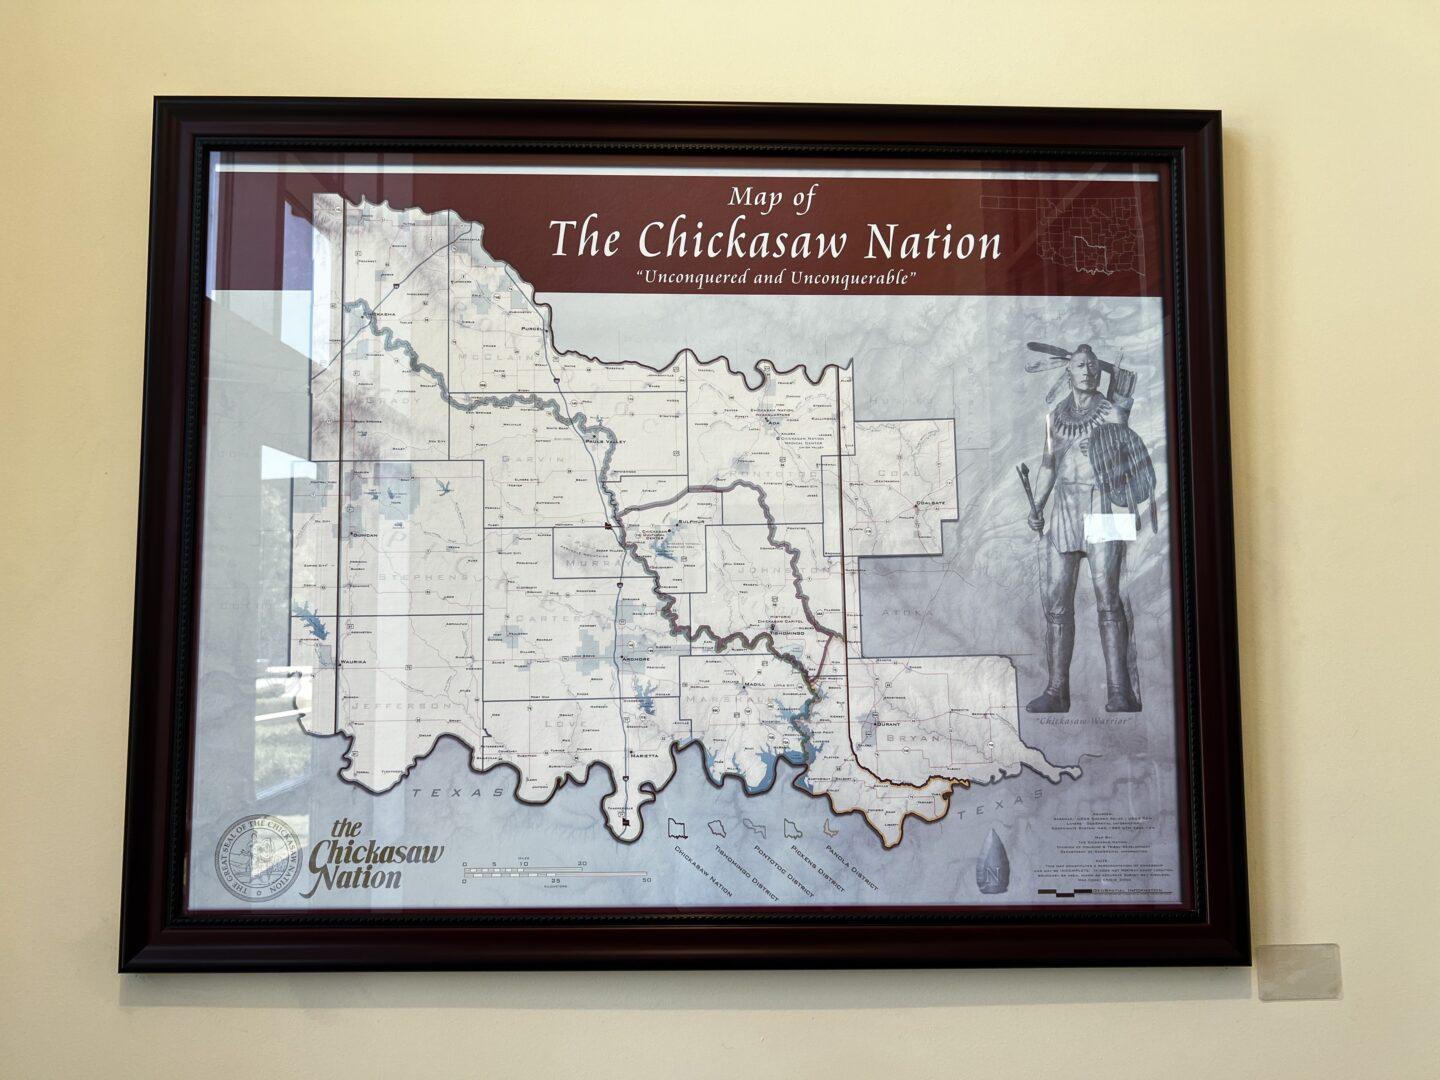 Framed map of the Chickasaw Nation